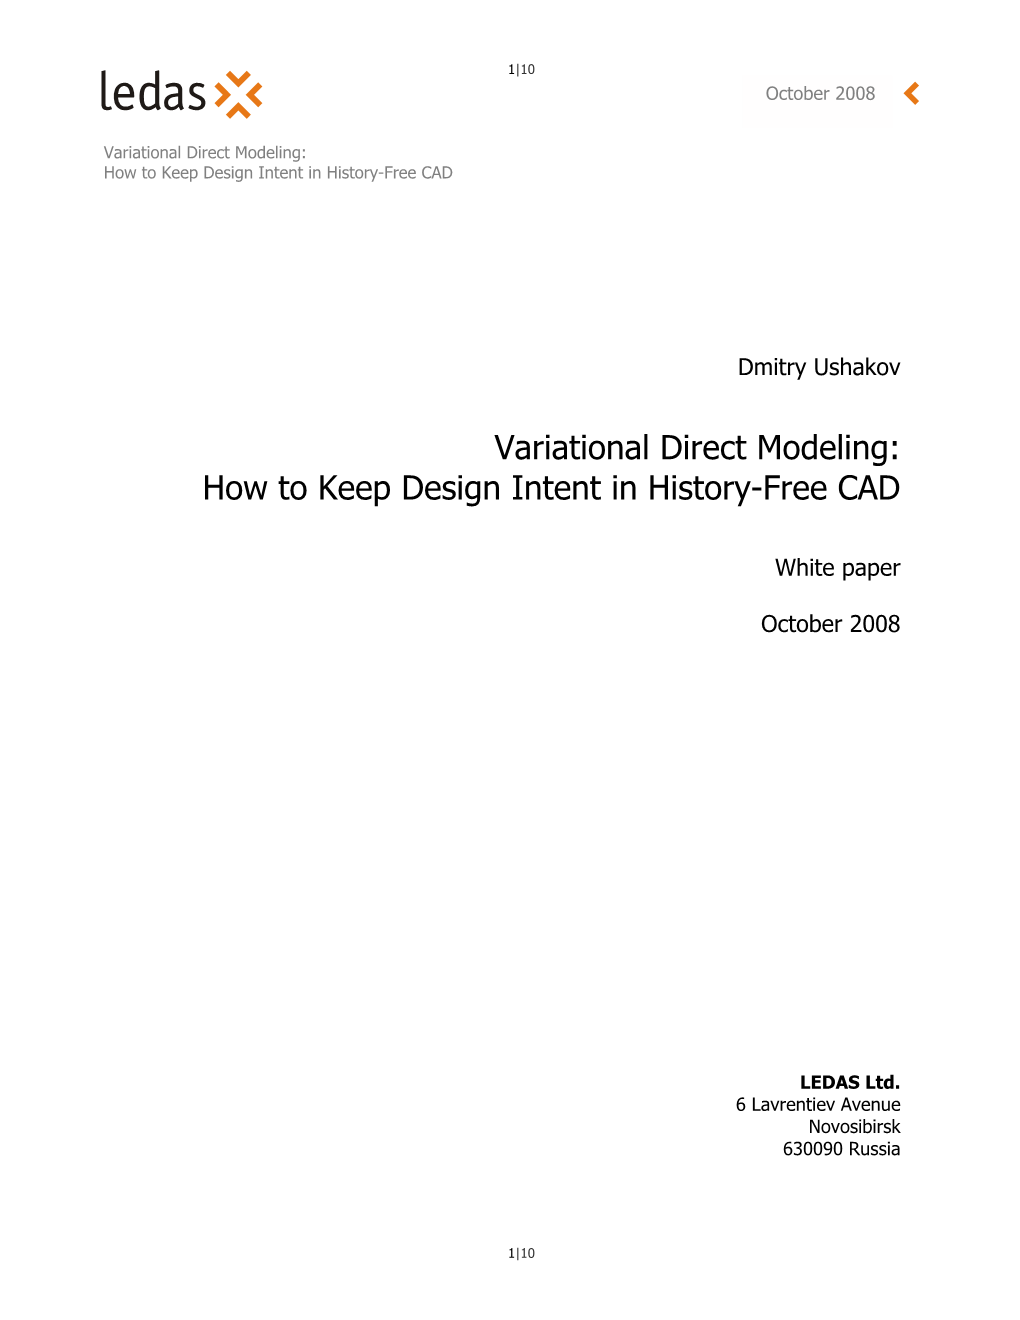 Variational Direct Modeling: How to Keep Design Intent in History-Free CAD